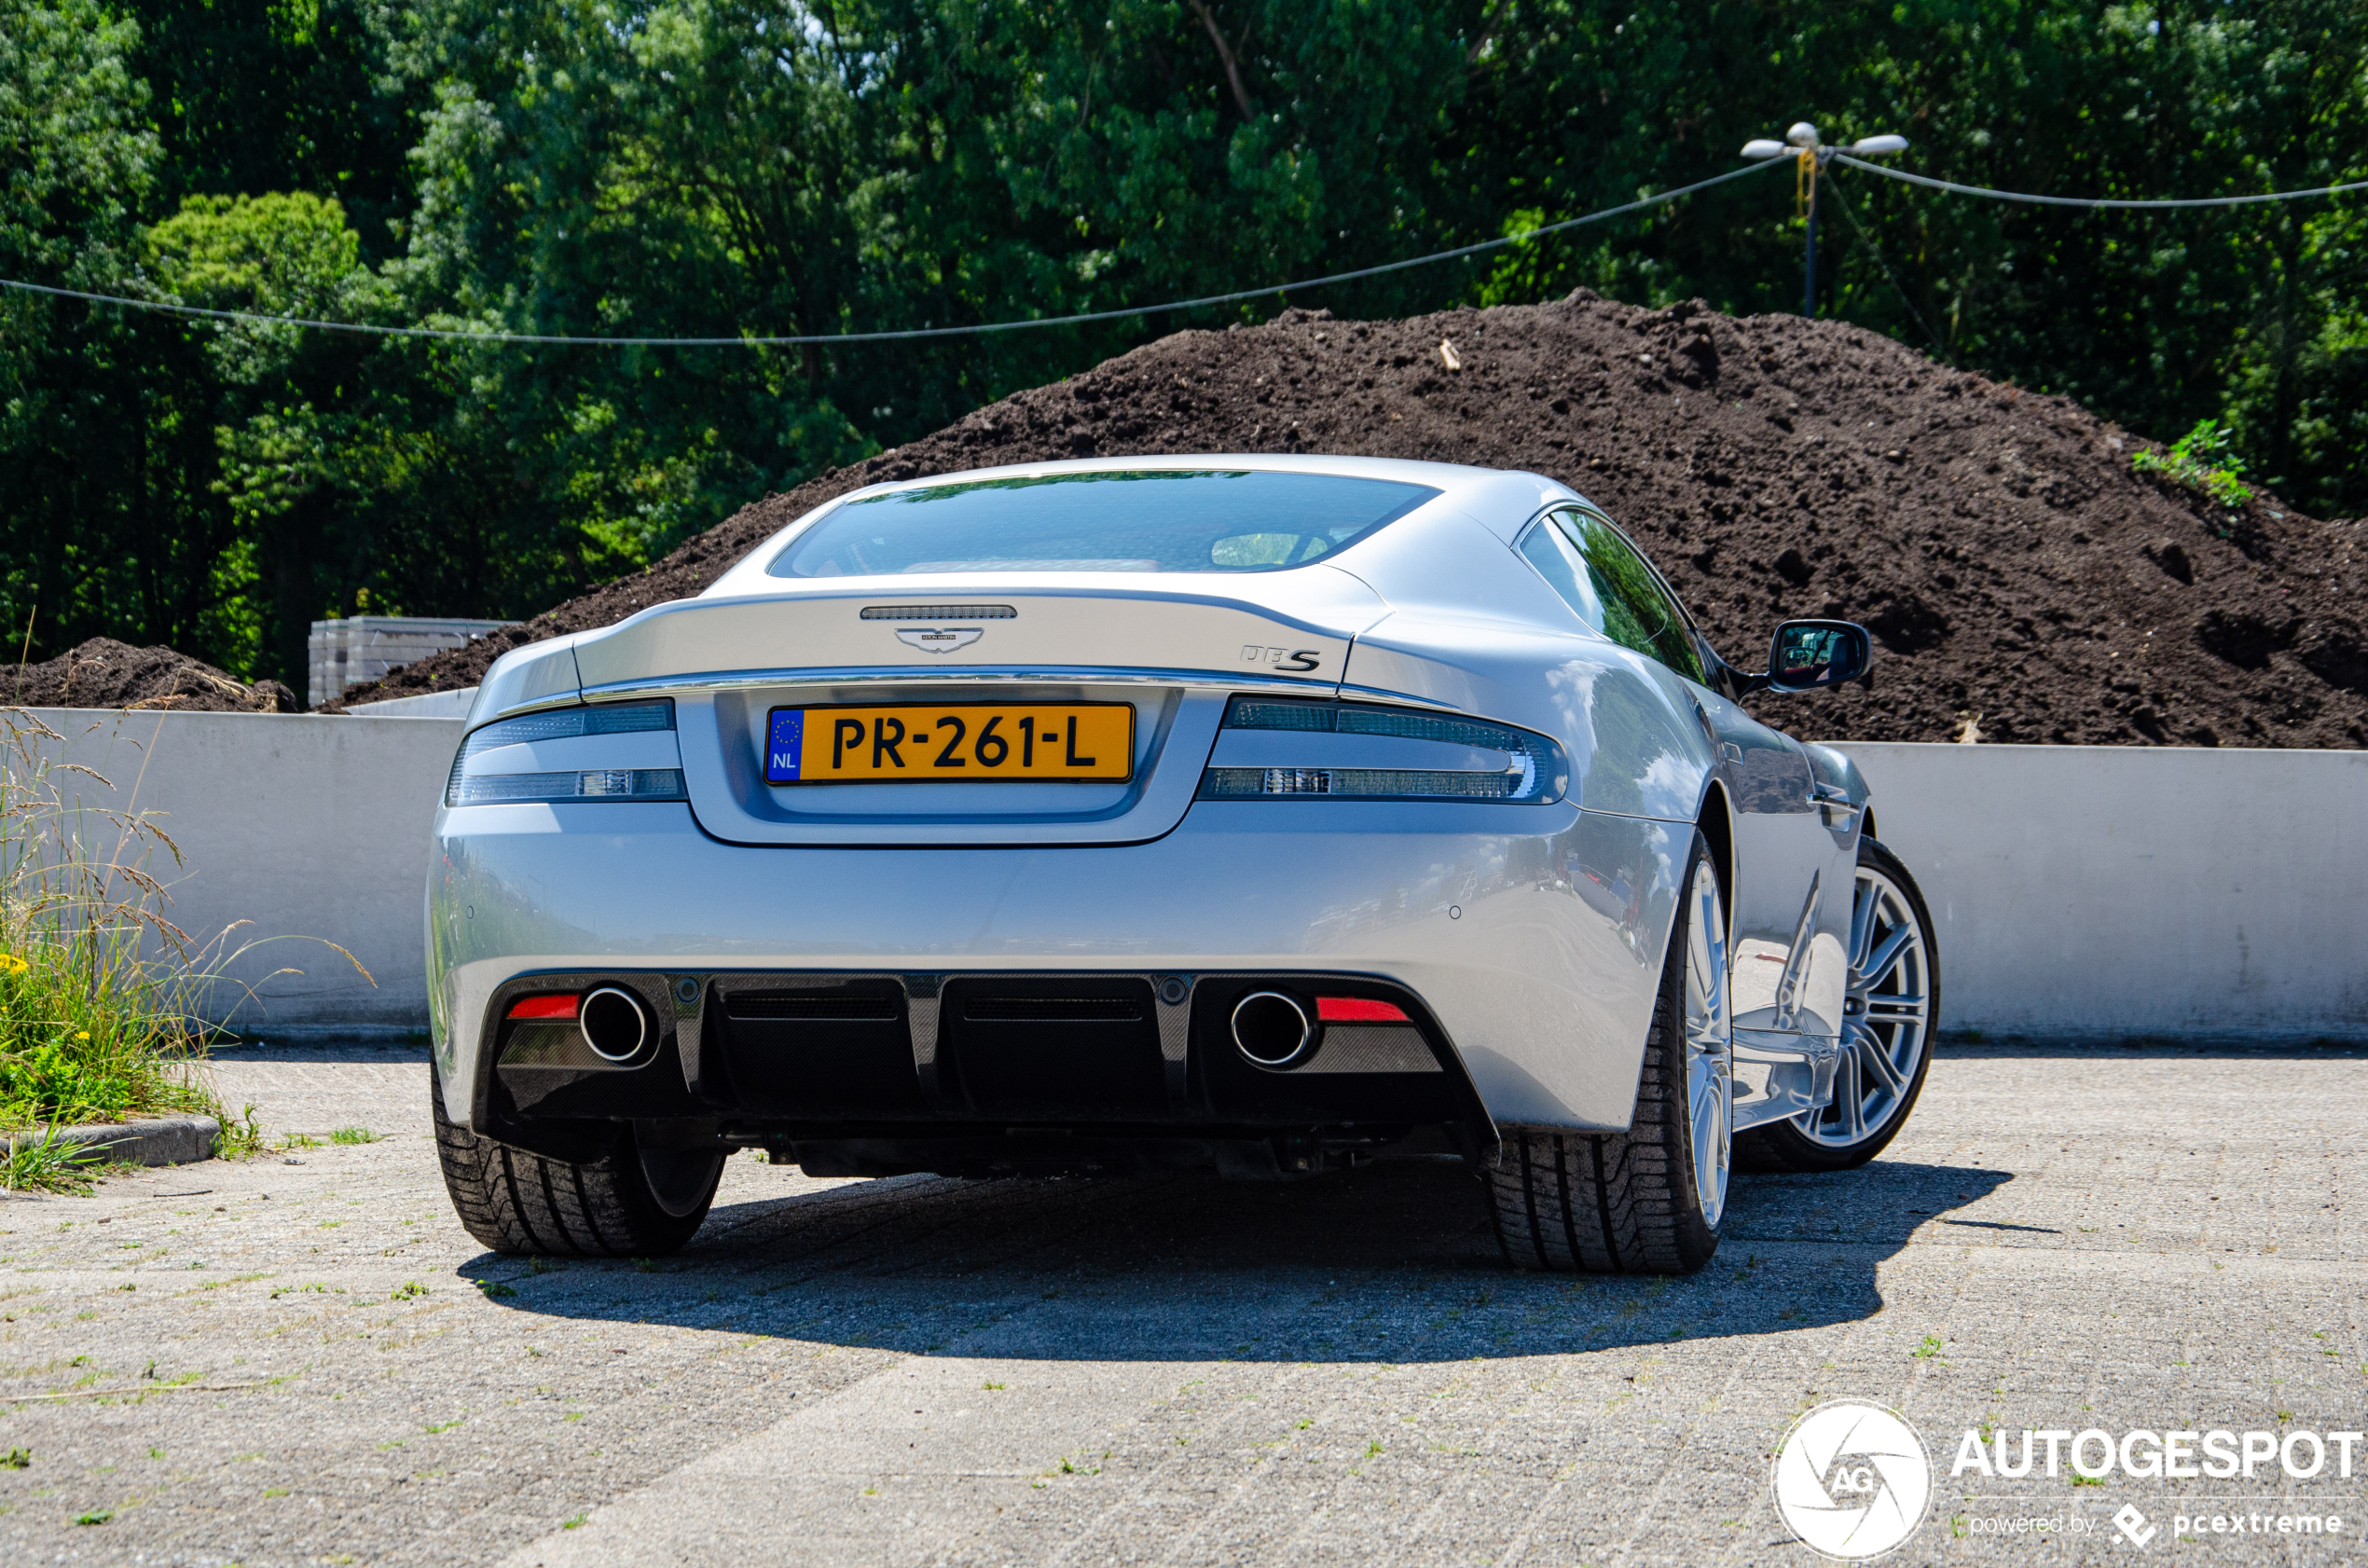 Is the DBS the ultimate Aston?